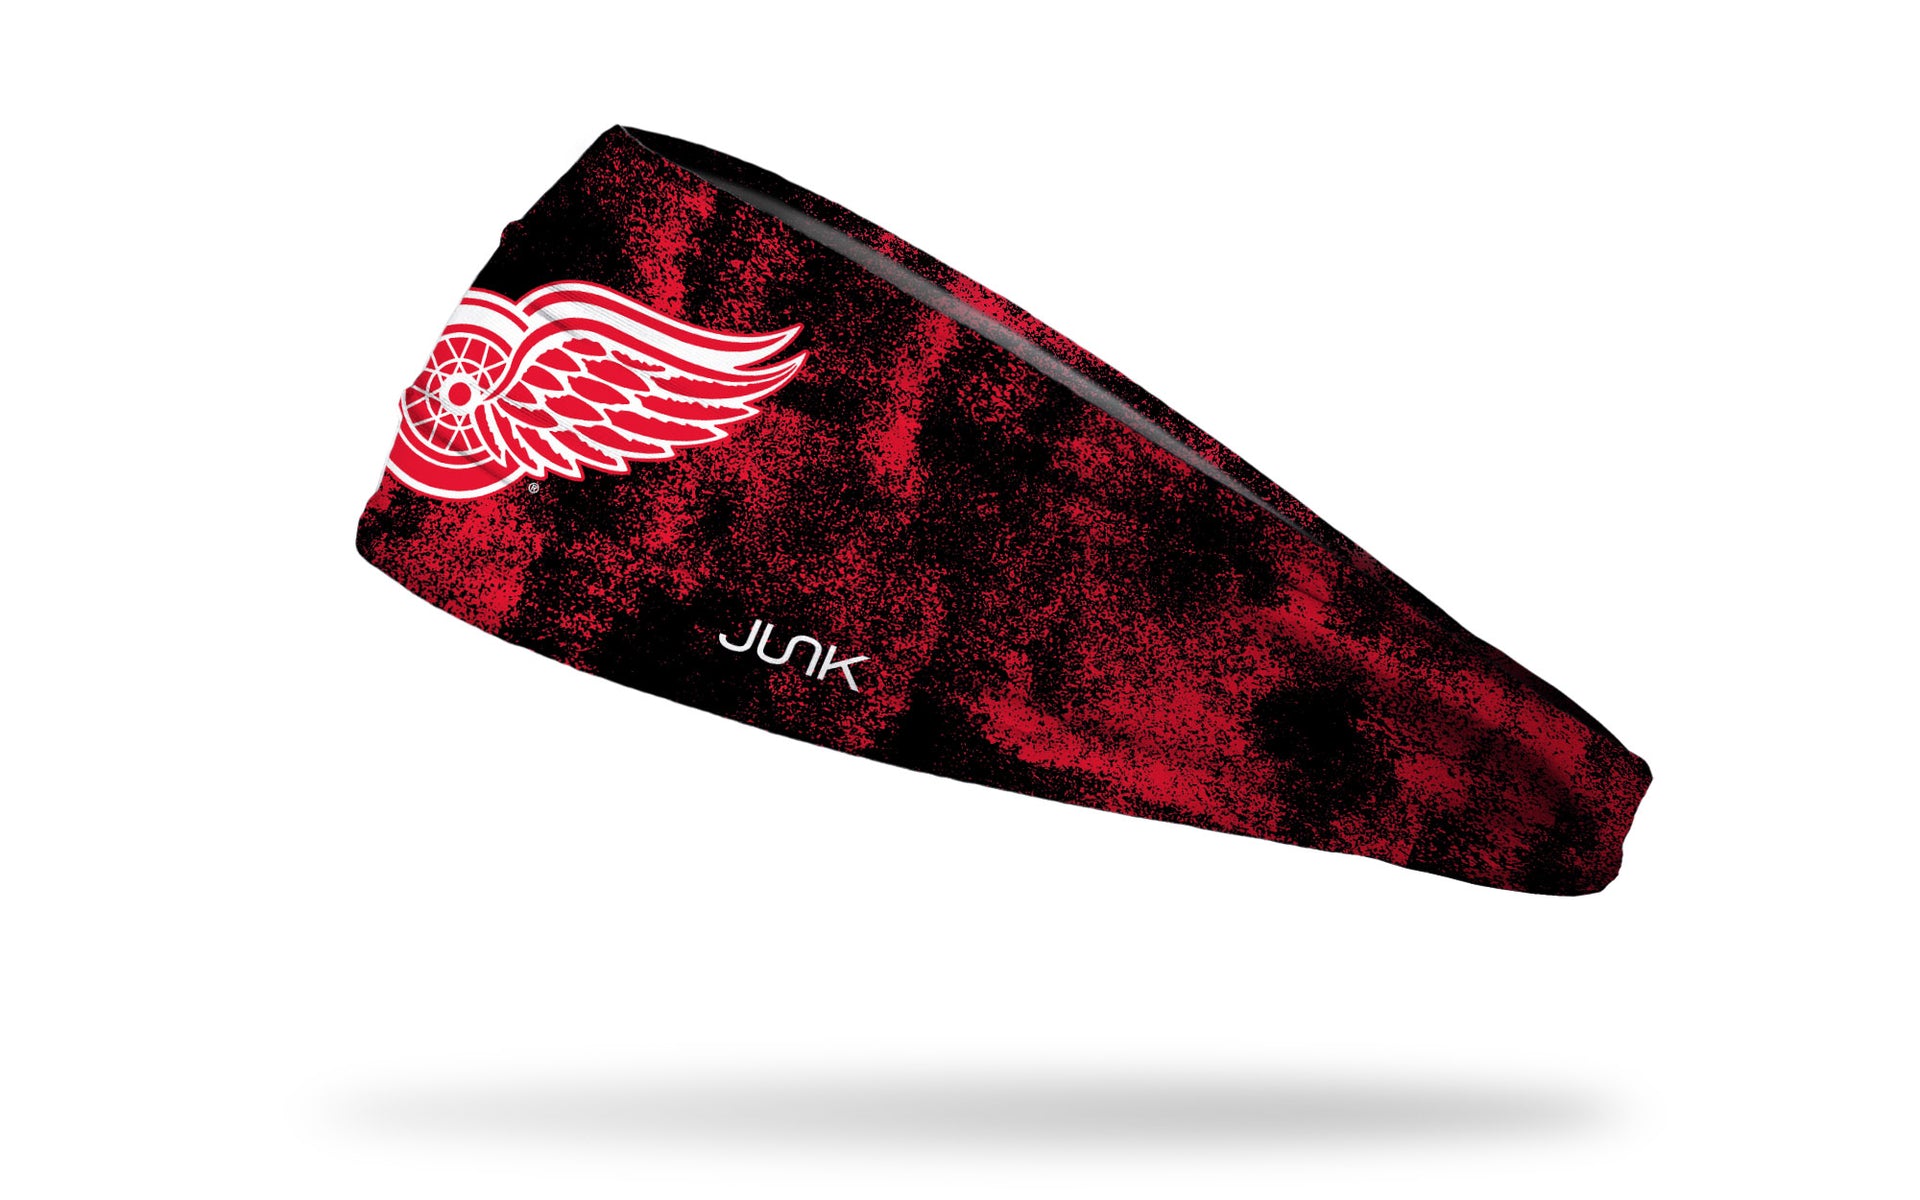 Detroit Red Wings: Grunge Headband - View 1